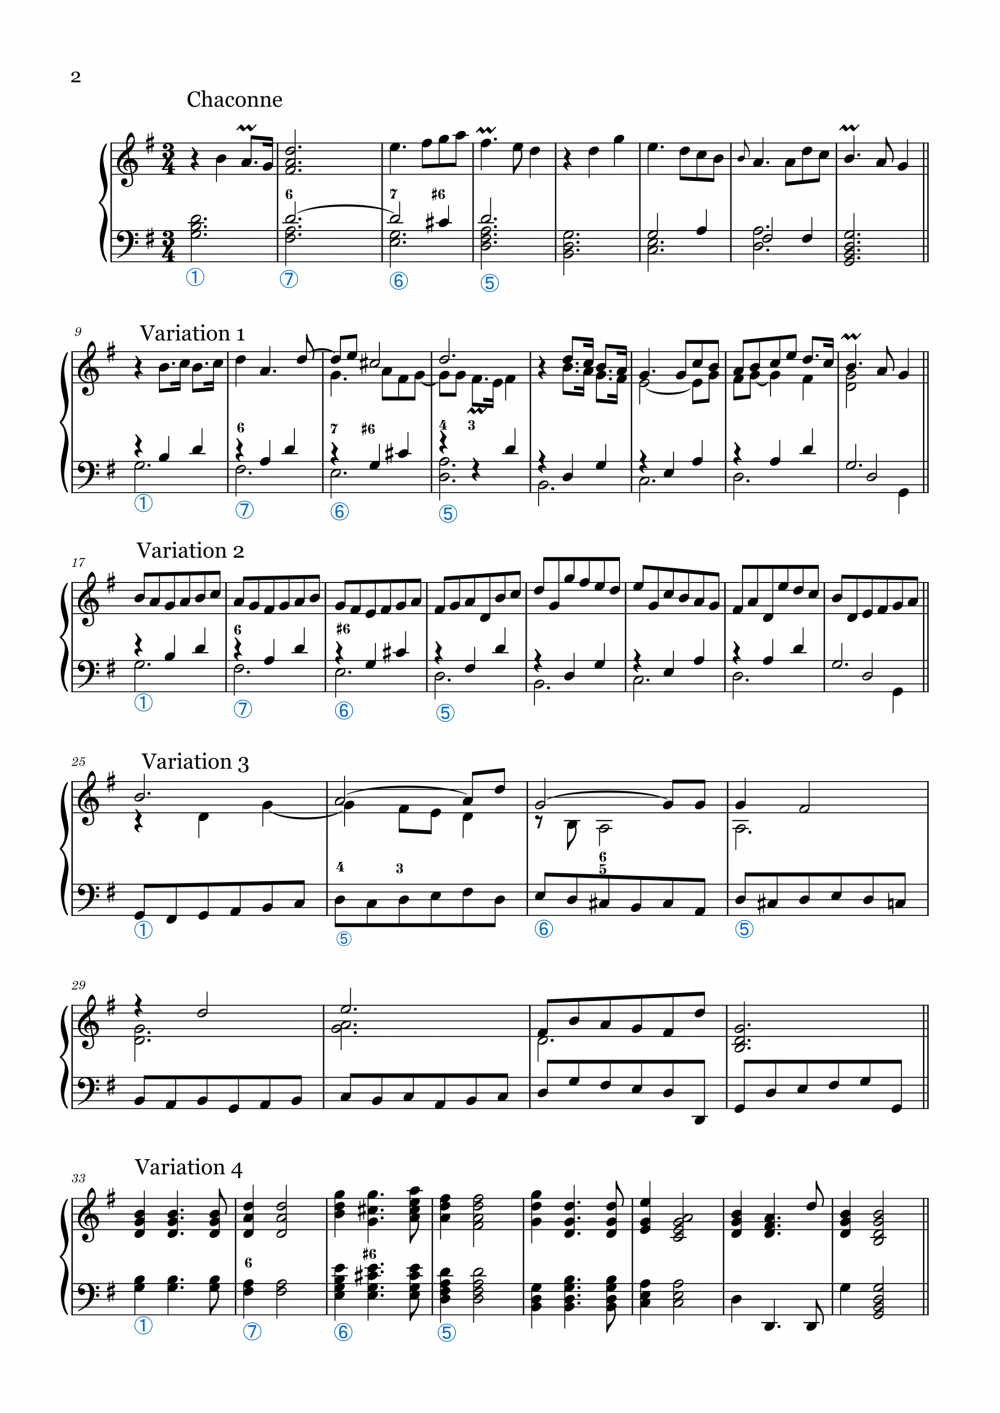 Prelude and Chaconne in G major HWV 442 Georg Friedrich Hndel-2.png